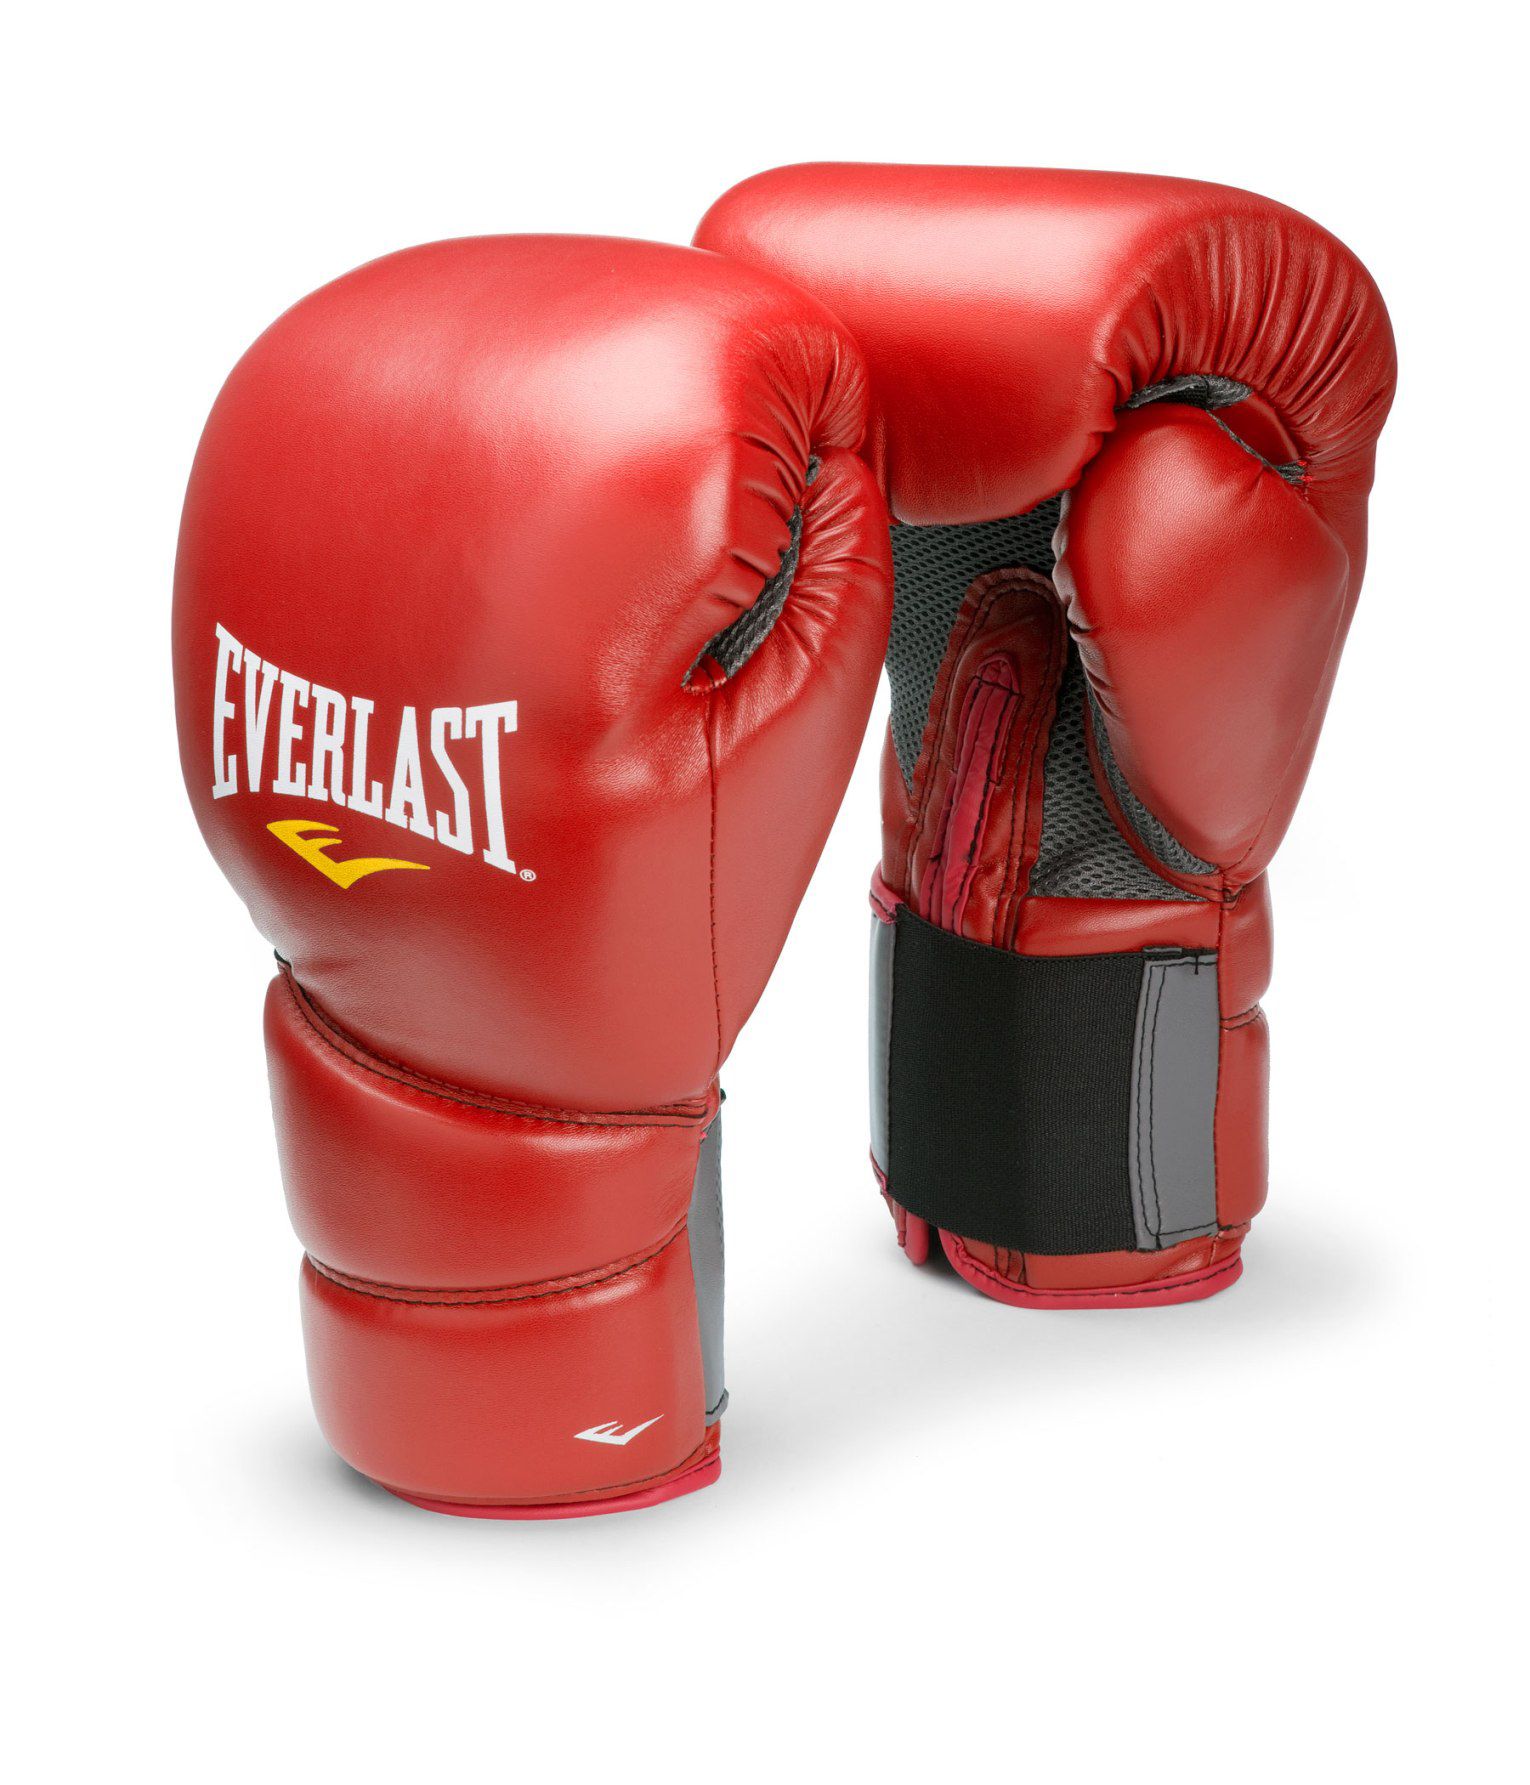 Everlast® MMA Pro Style Muay Thai Gloves 12 oz.   Fitness & Sports   Boxing & Mixed Martial Arts   MMA Accessories